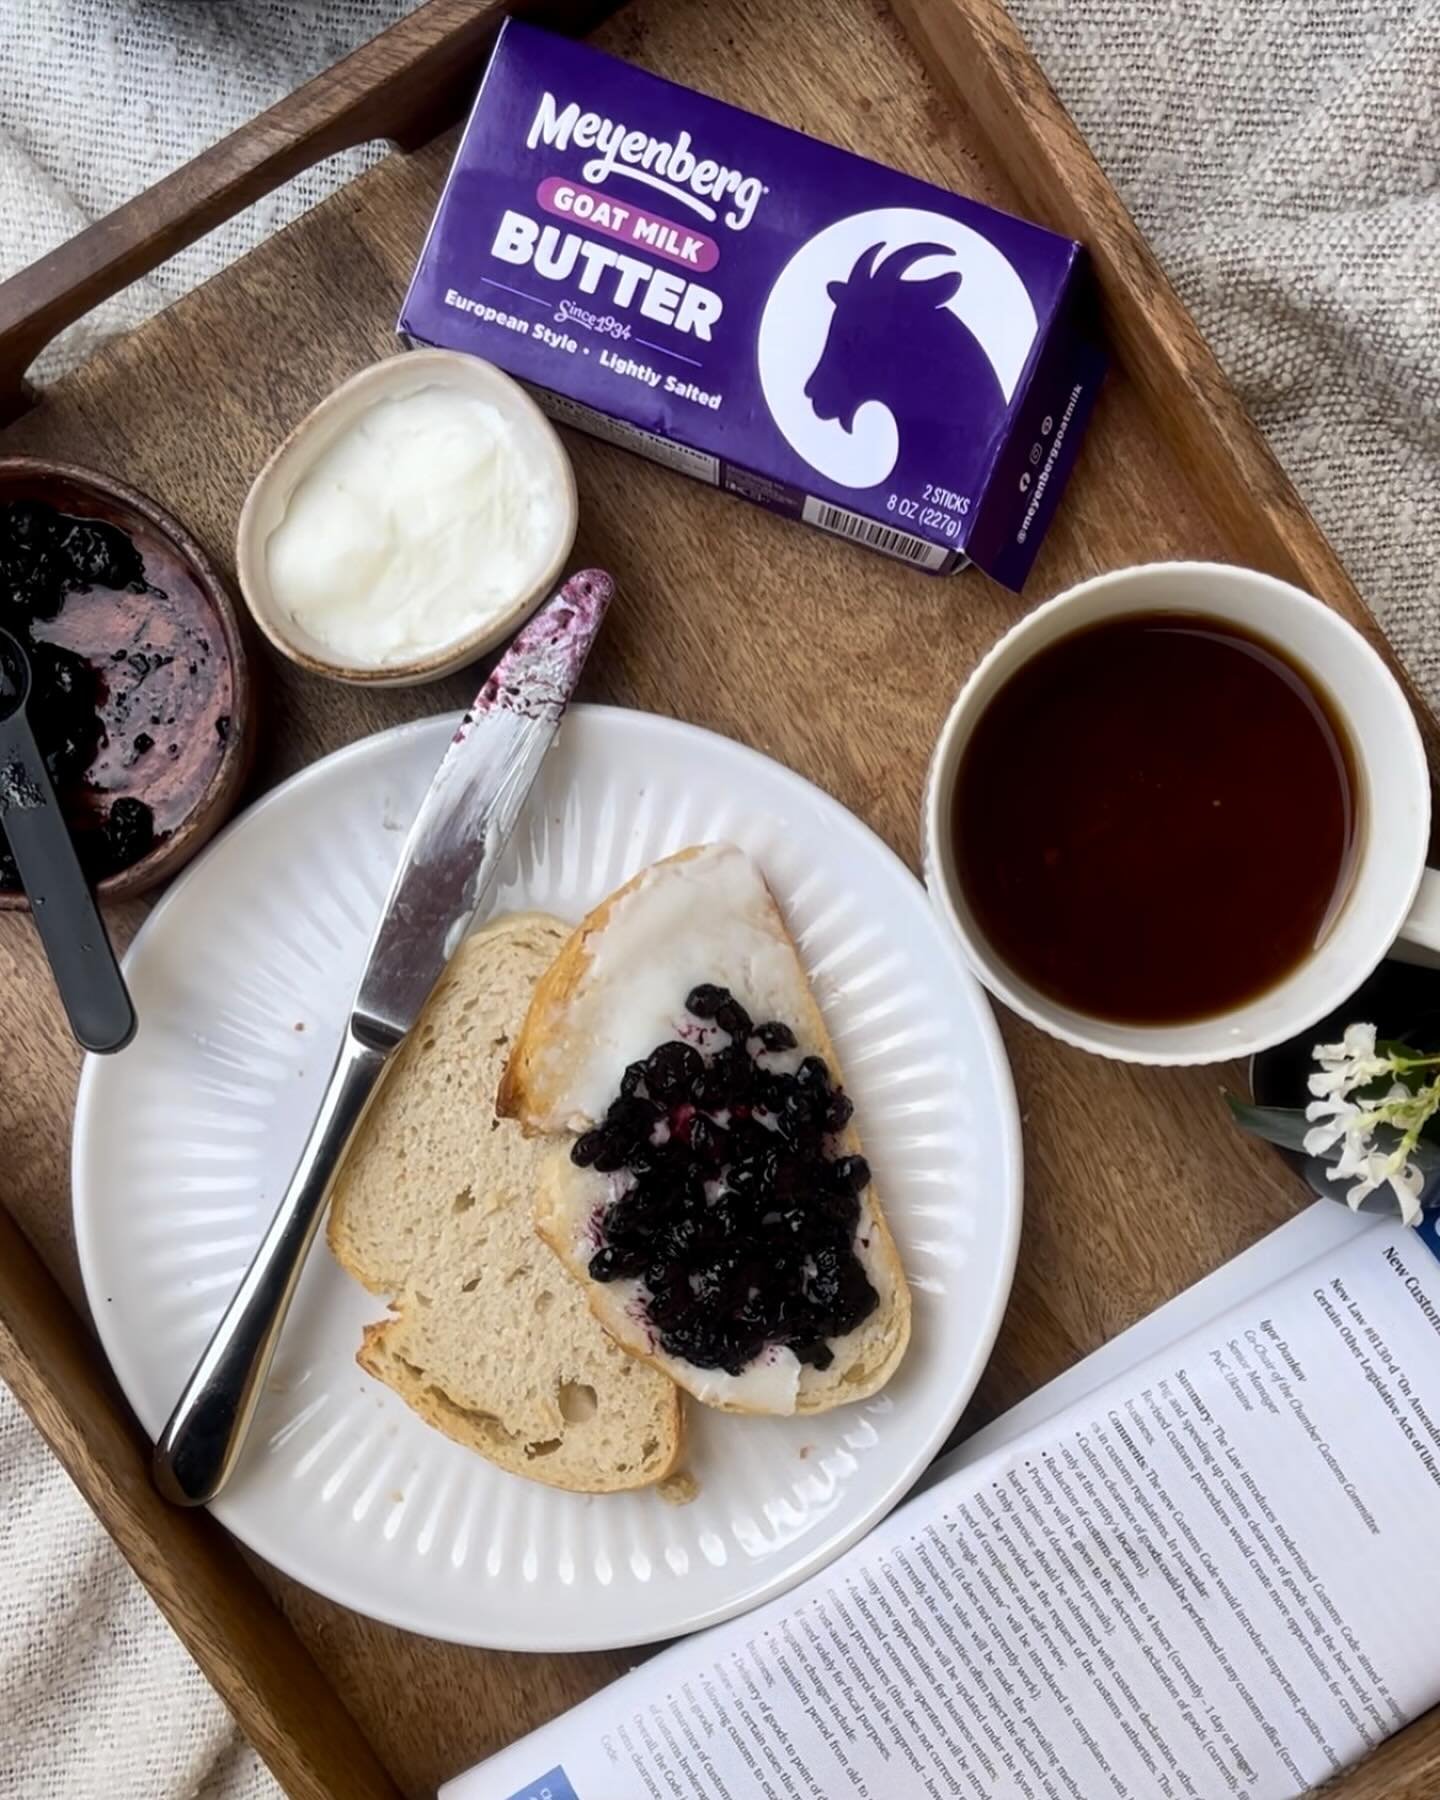 Who doesn&rsquo;t love a healthy amount of goat butter on freshly toasted bread? Paired with jam? You truly can&rsquo;t go wrong.

sometimes it&rsquo;s the simple breakfast that will jumpstart your day. Try out this classic combo today!

#GoatButter 